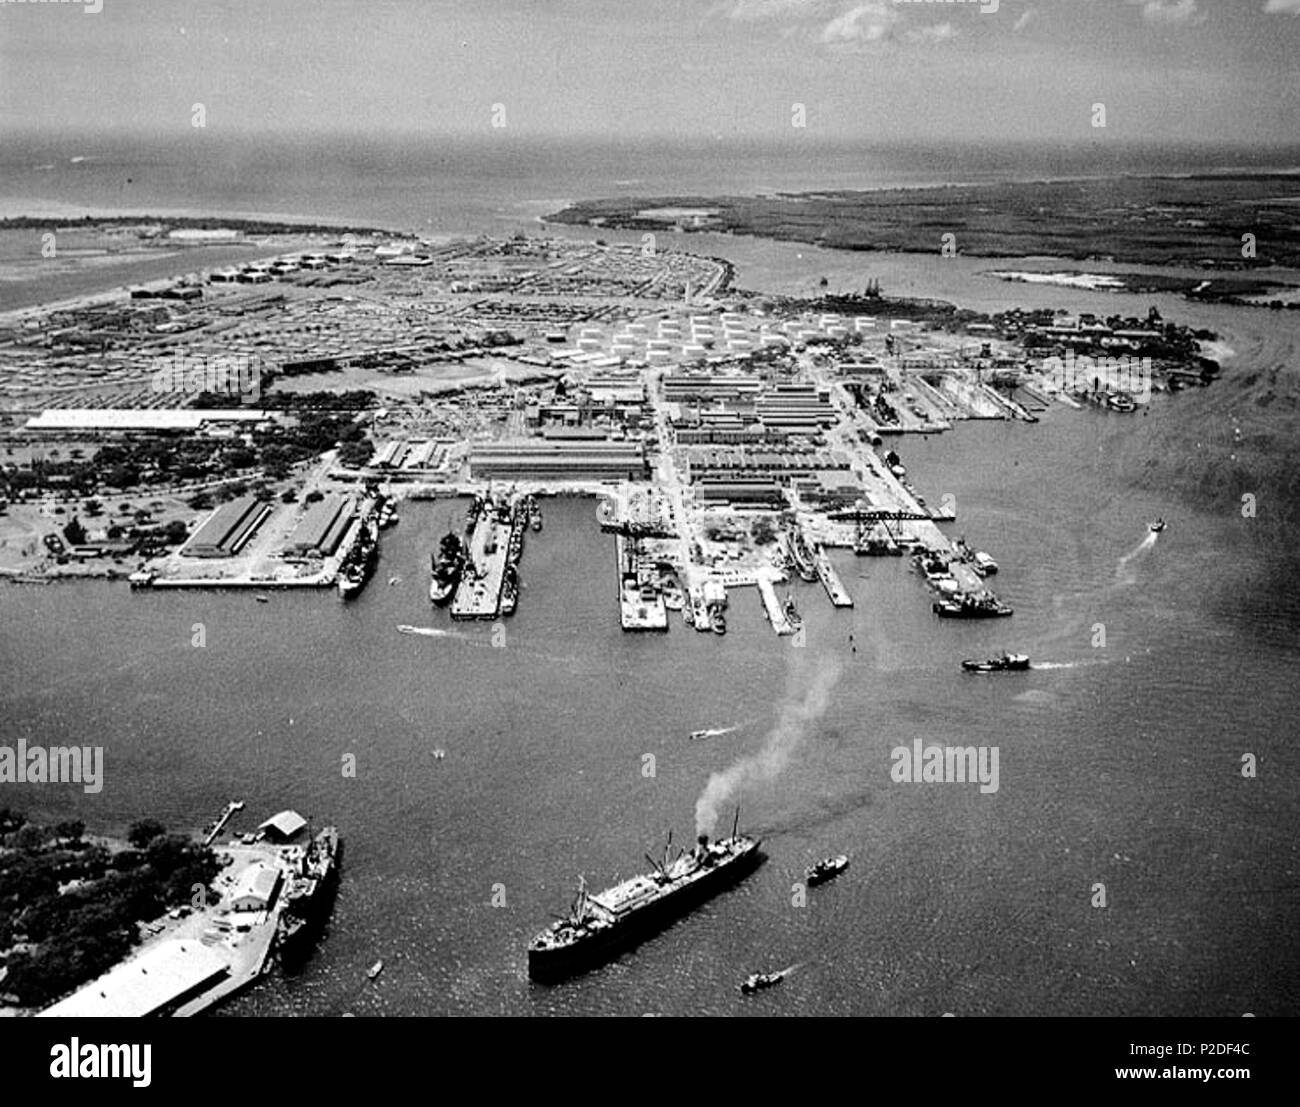 . Aerial photograph of the U.S. Navy Pearl Harbor Navy Yard, Oahu, Hawaii (USA), looking toward the southwest, taken on 13 October 1941, with the fuel tank farm in the center middle distance, the Marine Barracks to the left with Hickam Army Air Base beyond, and the harbour entrance channel in the center background. The passenger steamer Maui is in the lower center, with USS Oglala (CM-4) at the pier just to the left. A fuel oil barge (YO) is passing the end of 1010 Dock, to the right of center. 13 October 1941. USN 40 Pearl Harbor Navy Yard in October 1941 Stock Photo